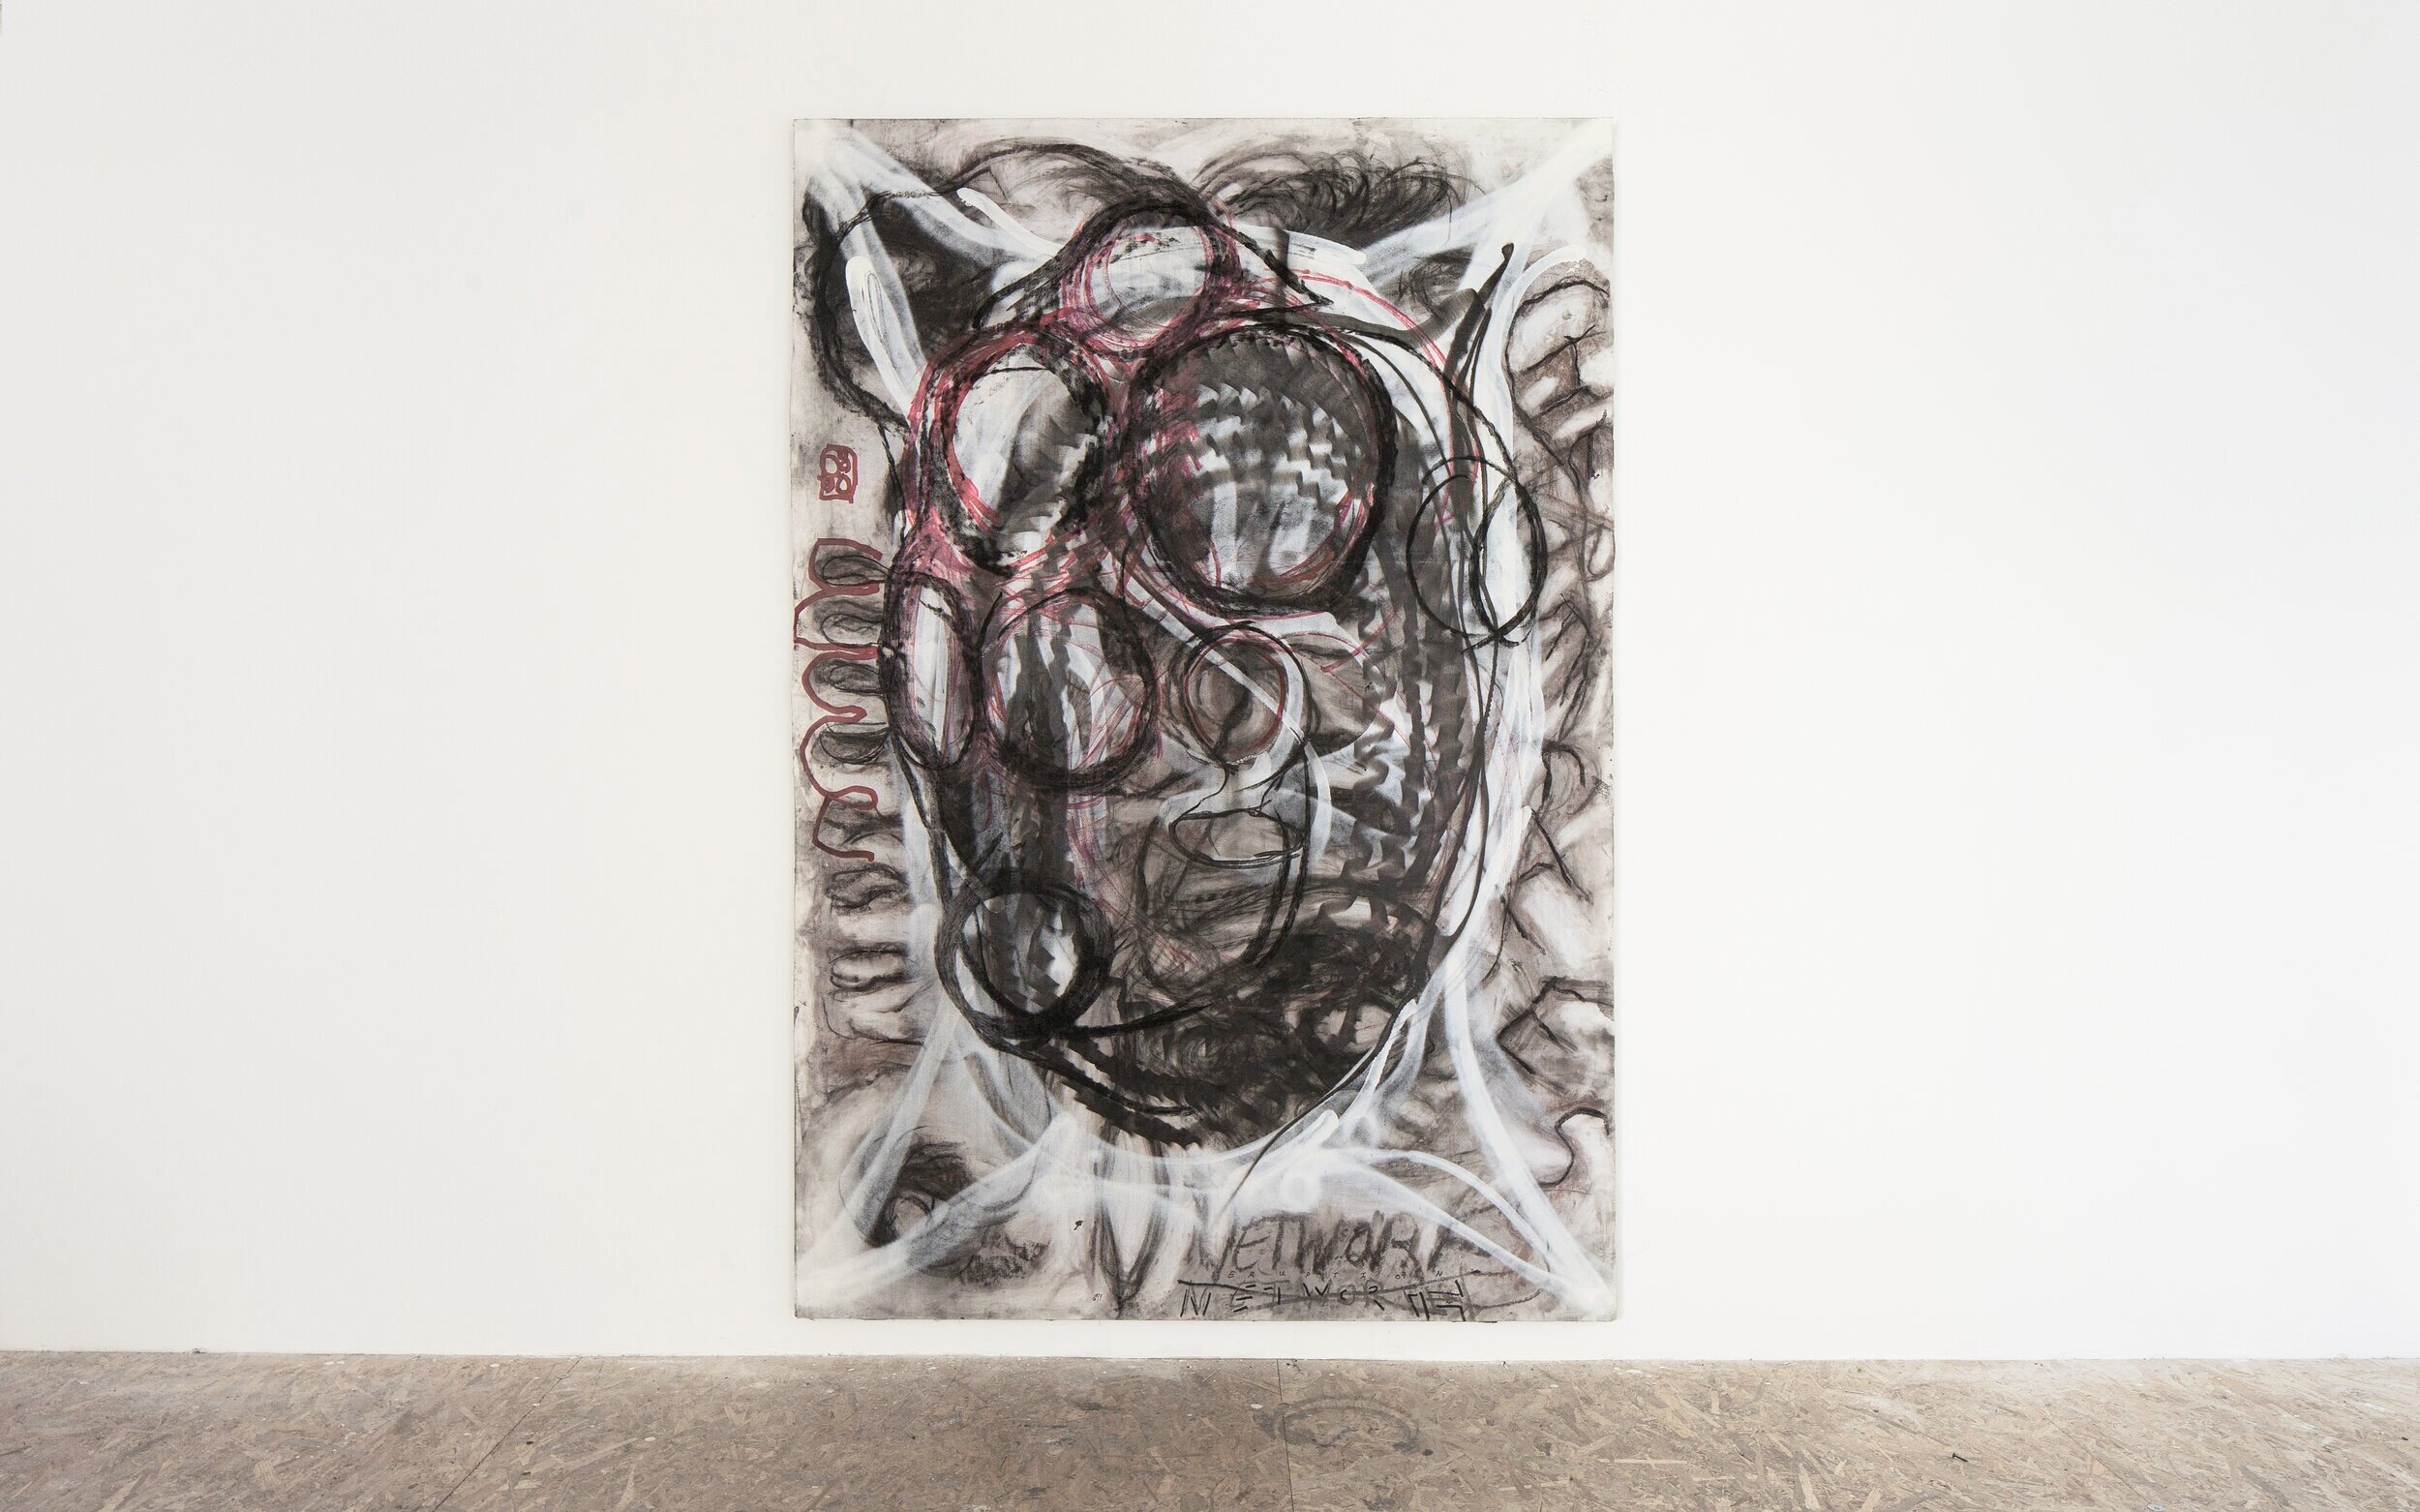  VULCAN, 210 x 150 x 4 cm, 2020, Charcoal, Ink, permanent marker, spray paint on canvas  